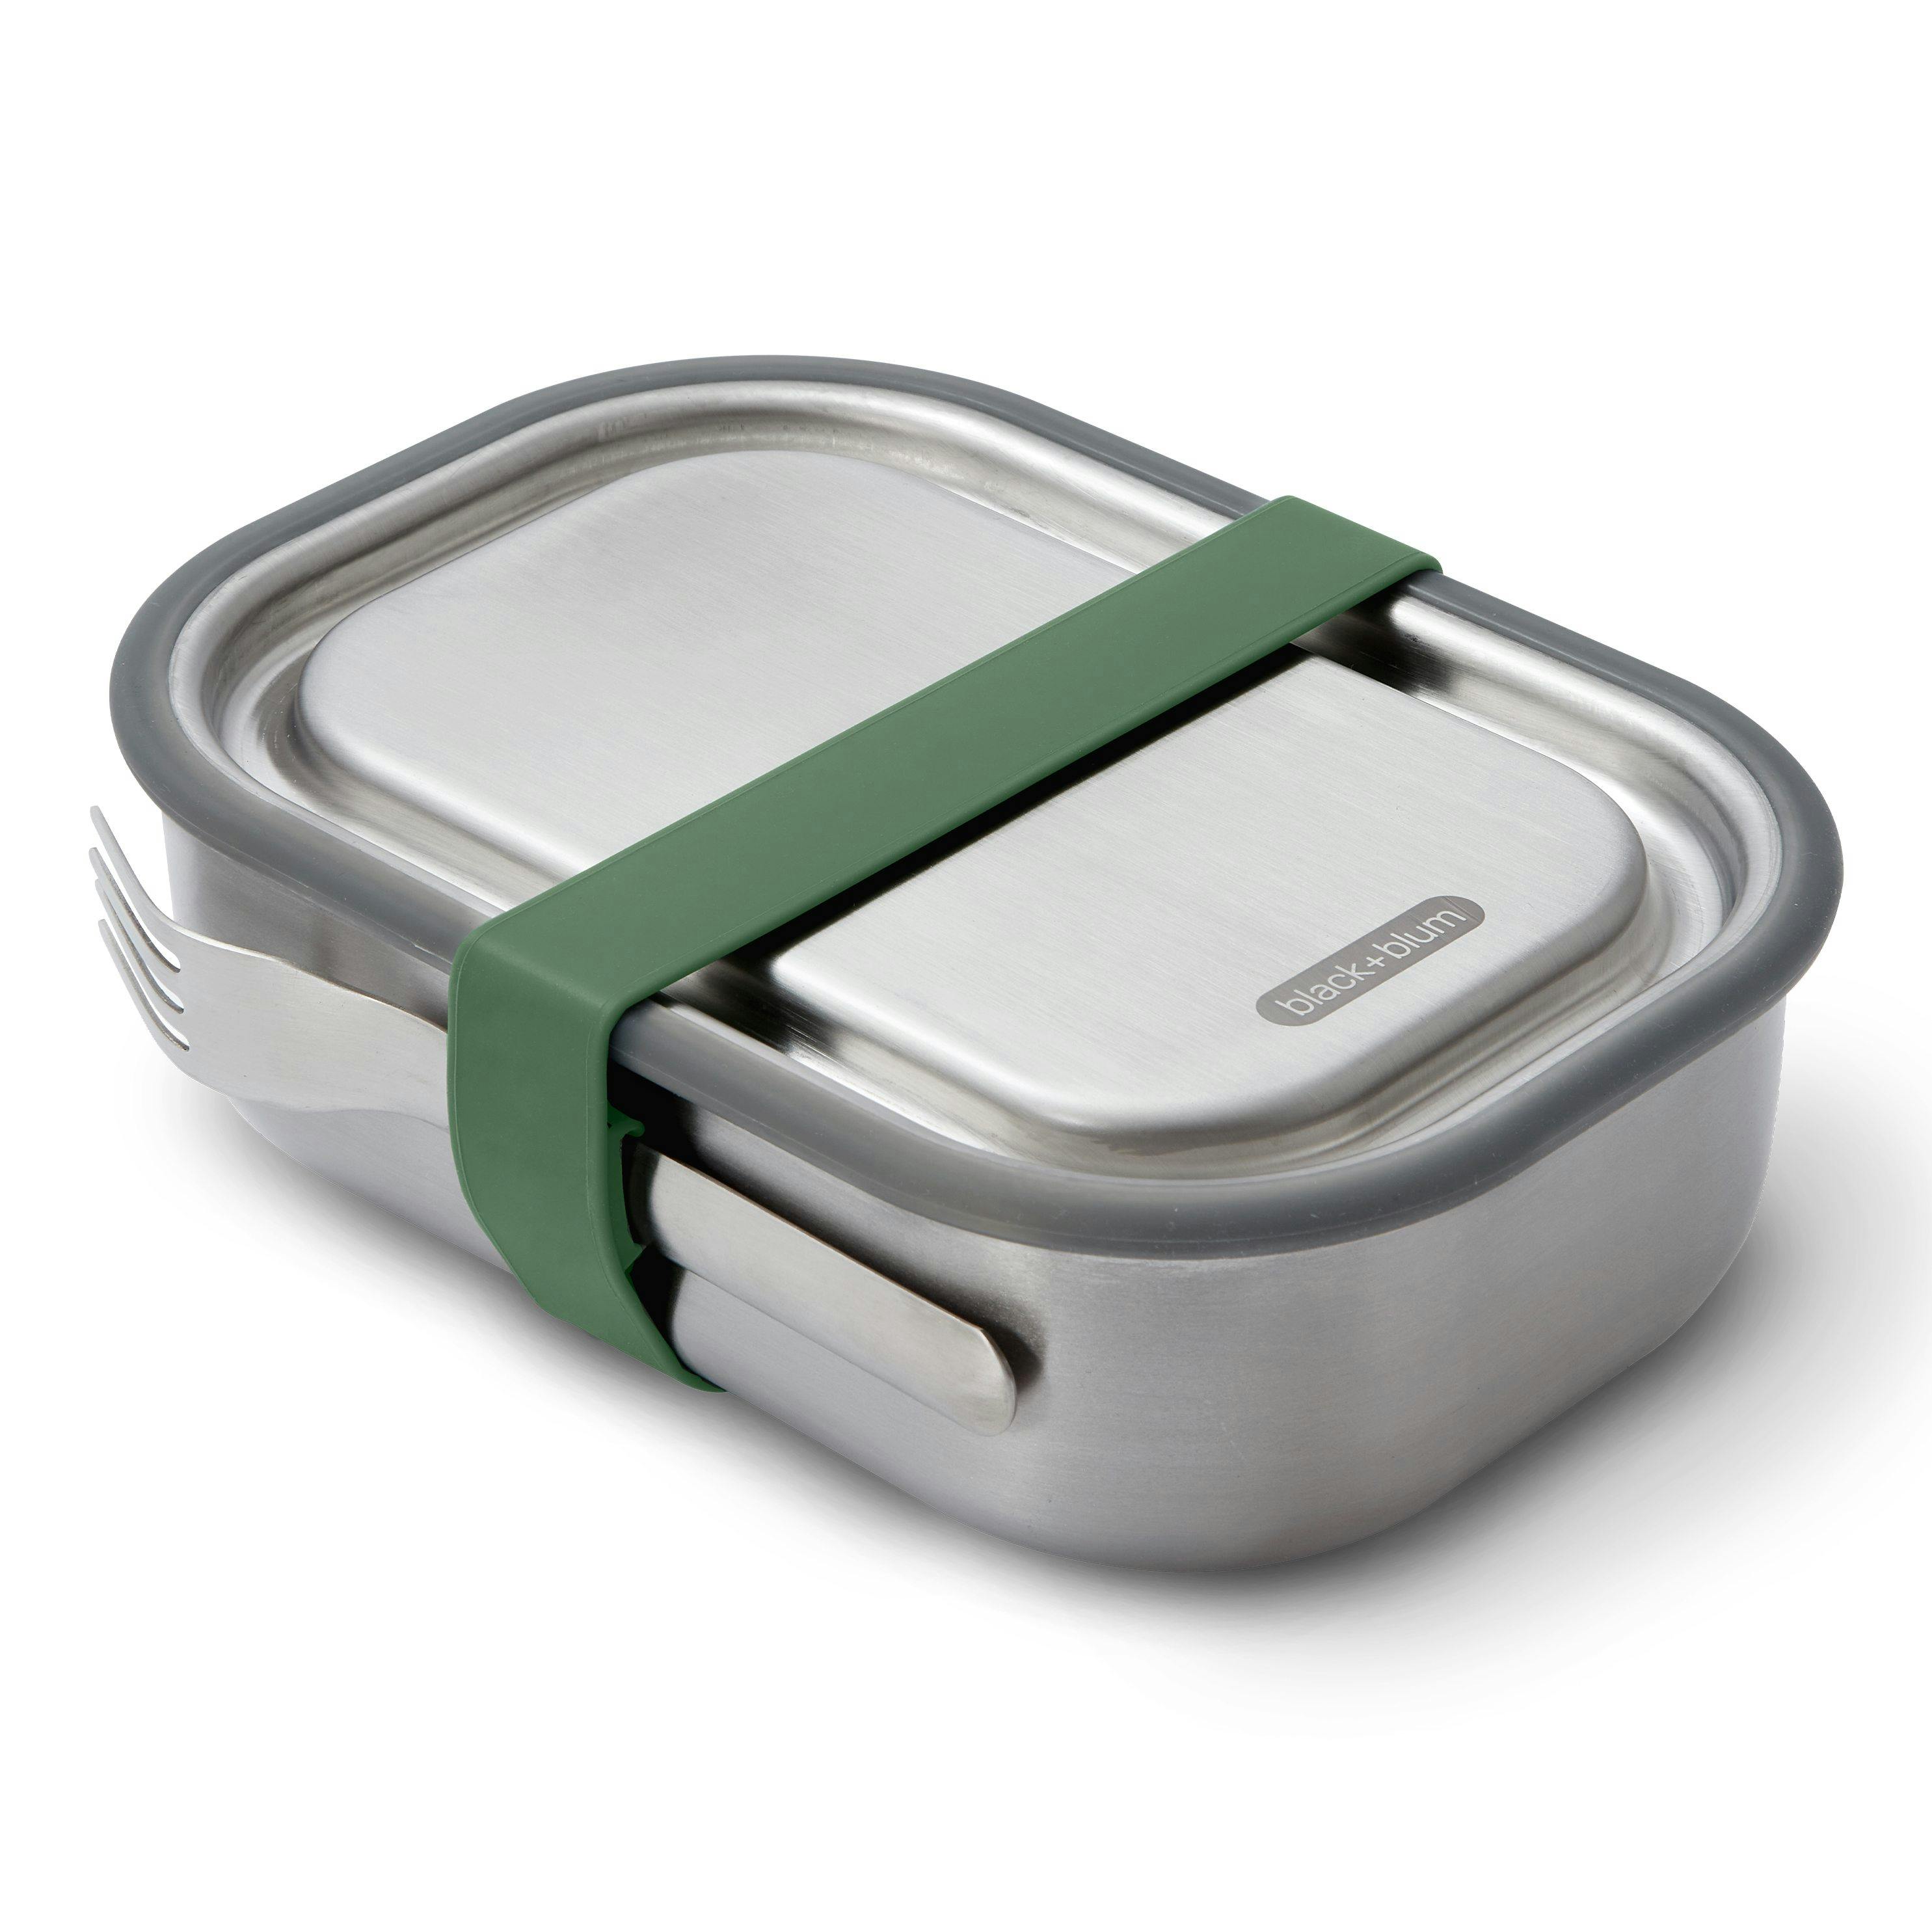 Large capacity leak-proof lunch box on it